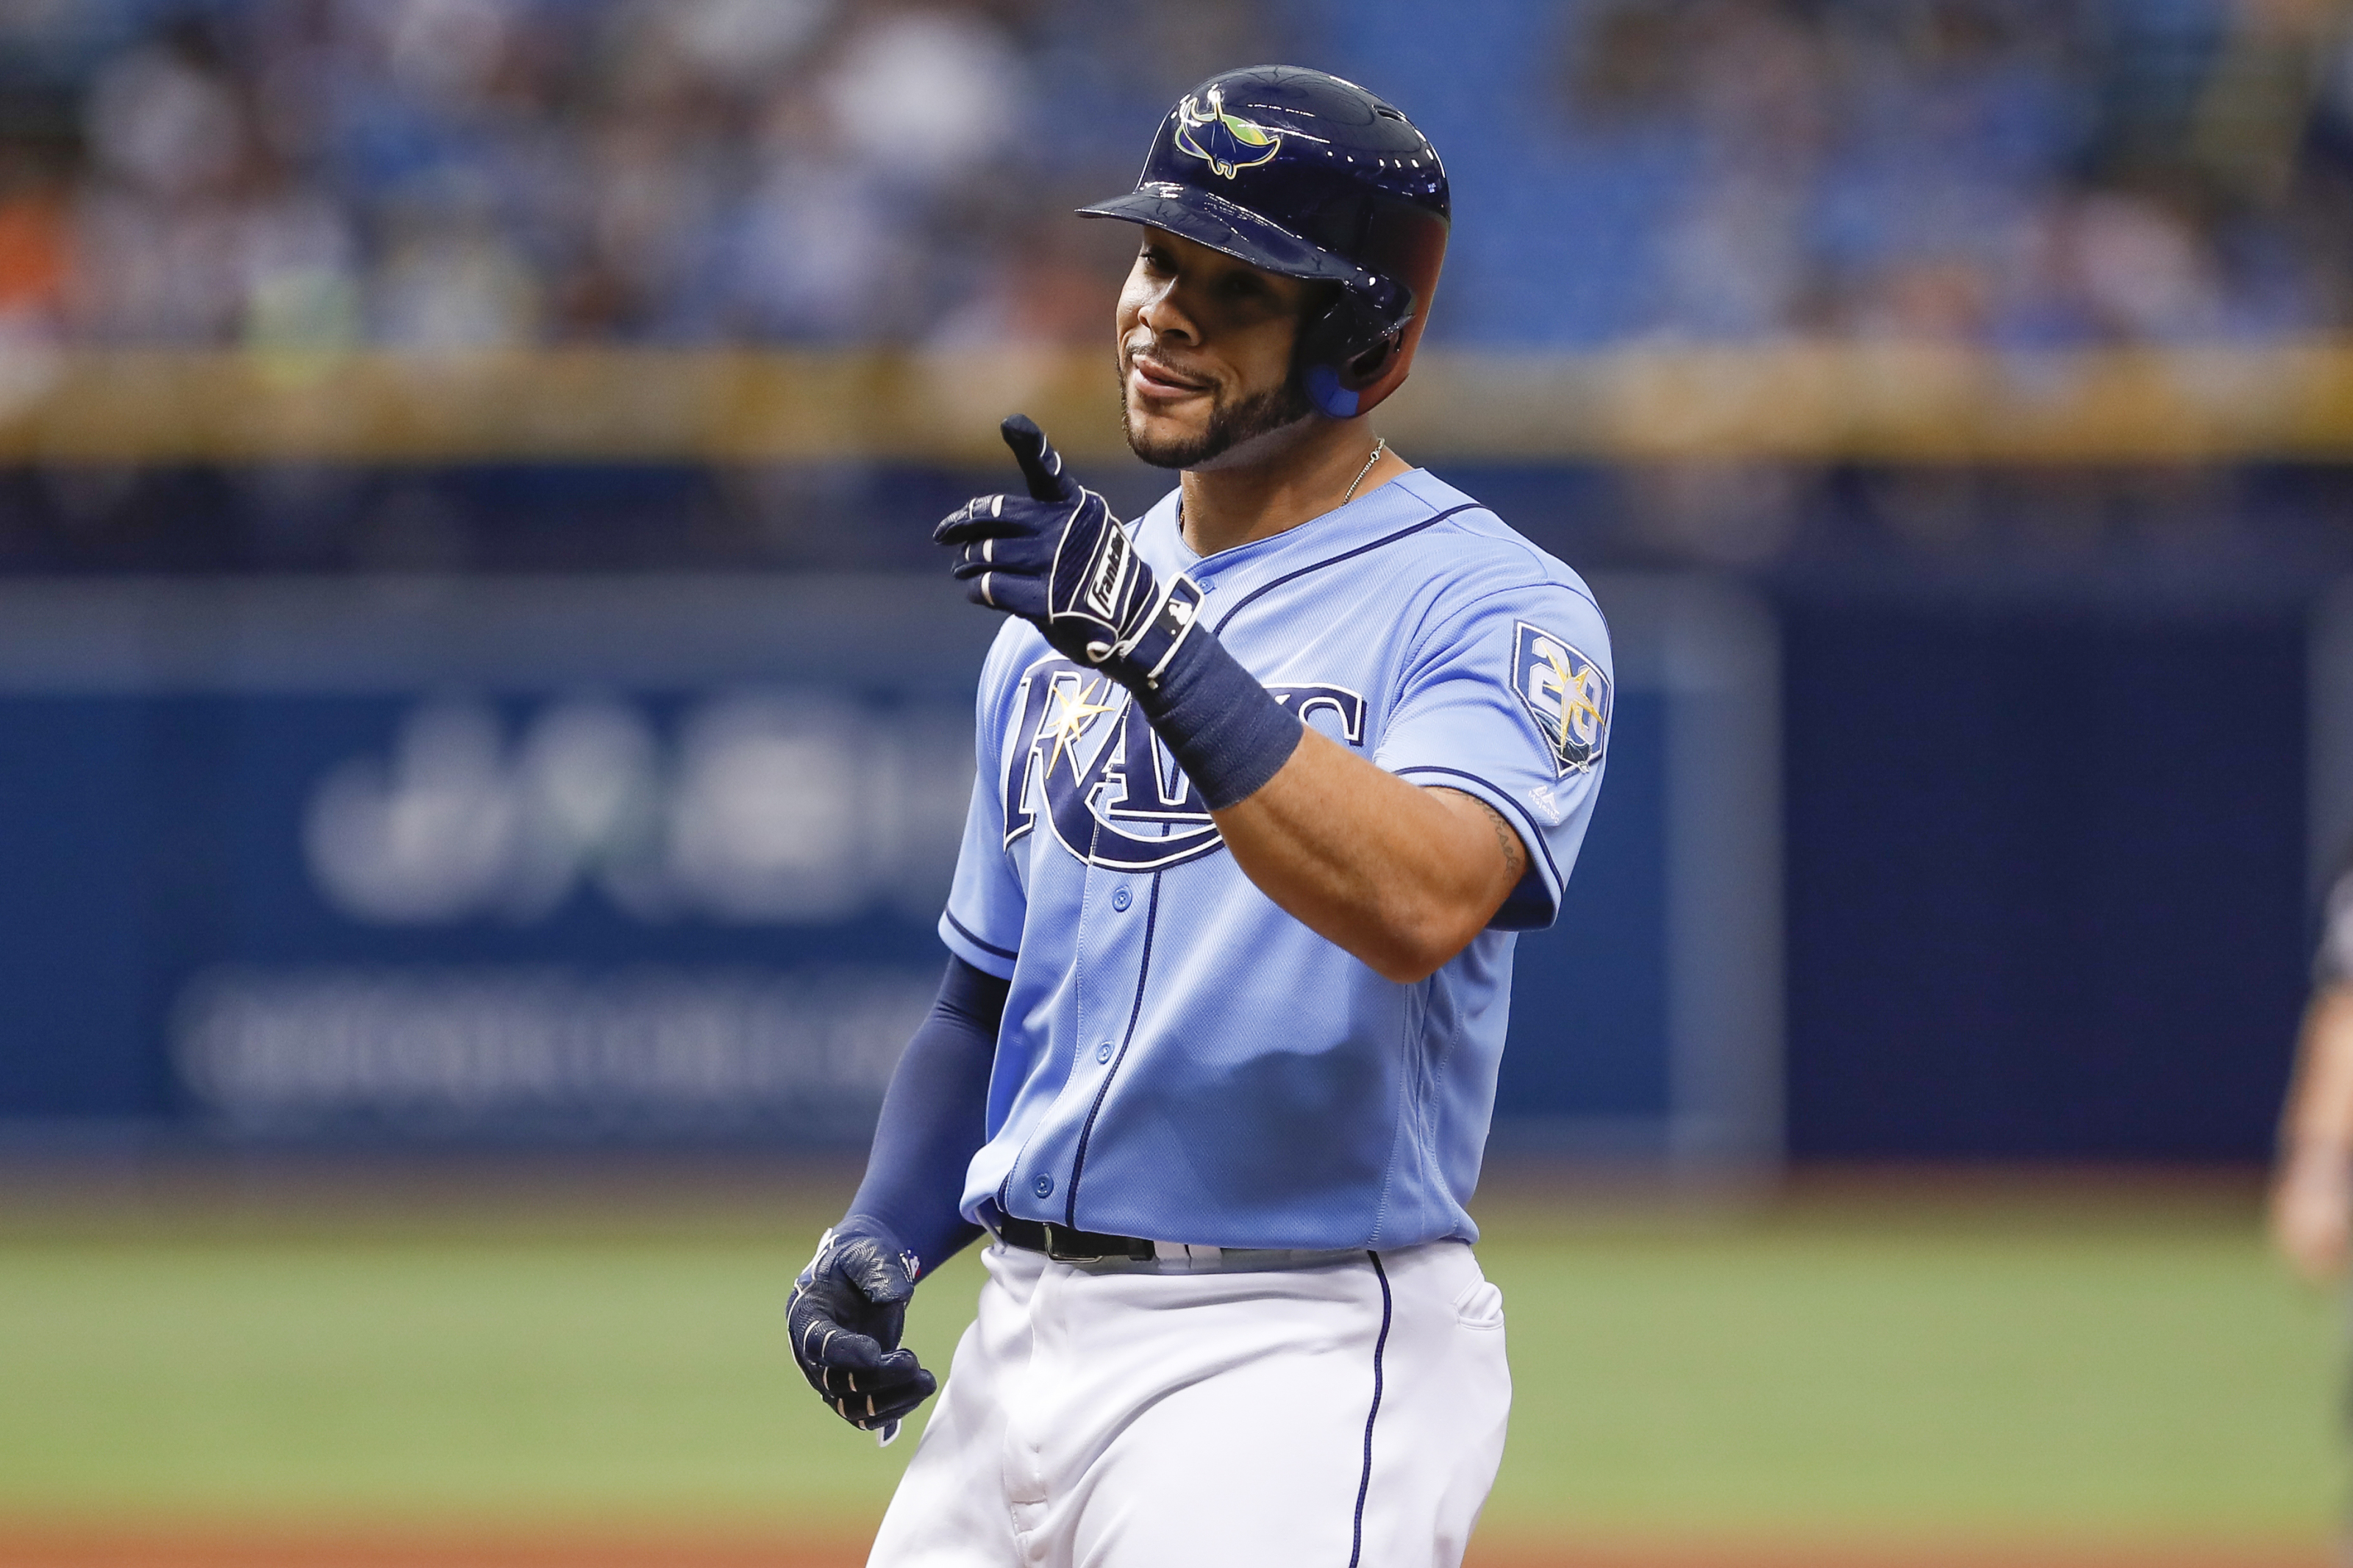 Tommy Pham says Rays are 'a team with really no fan base at all